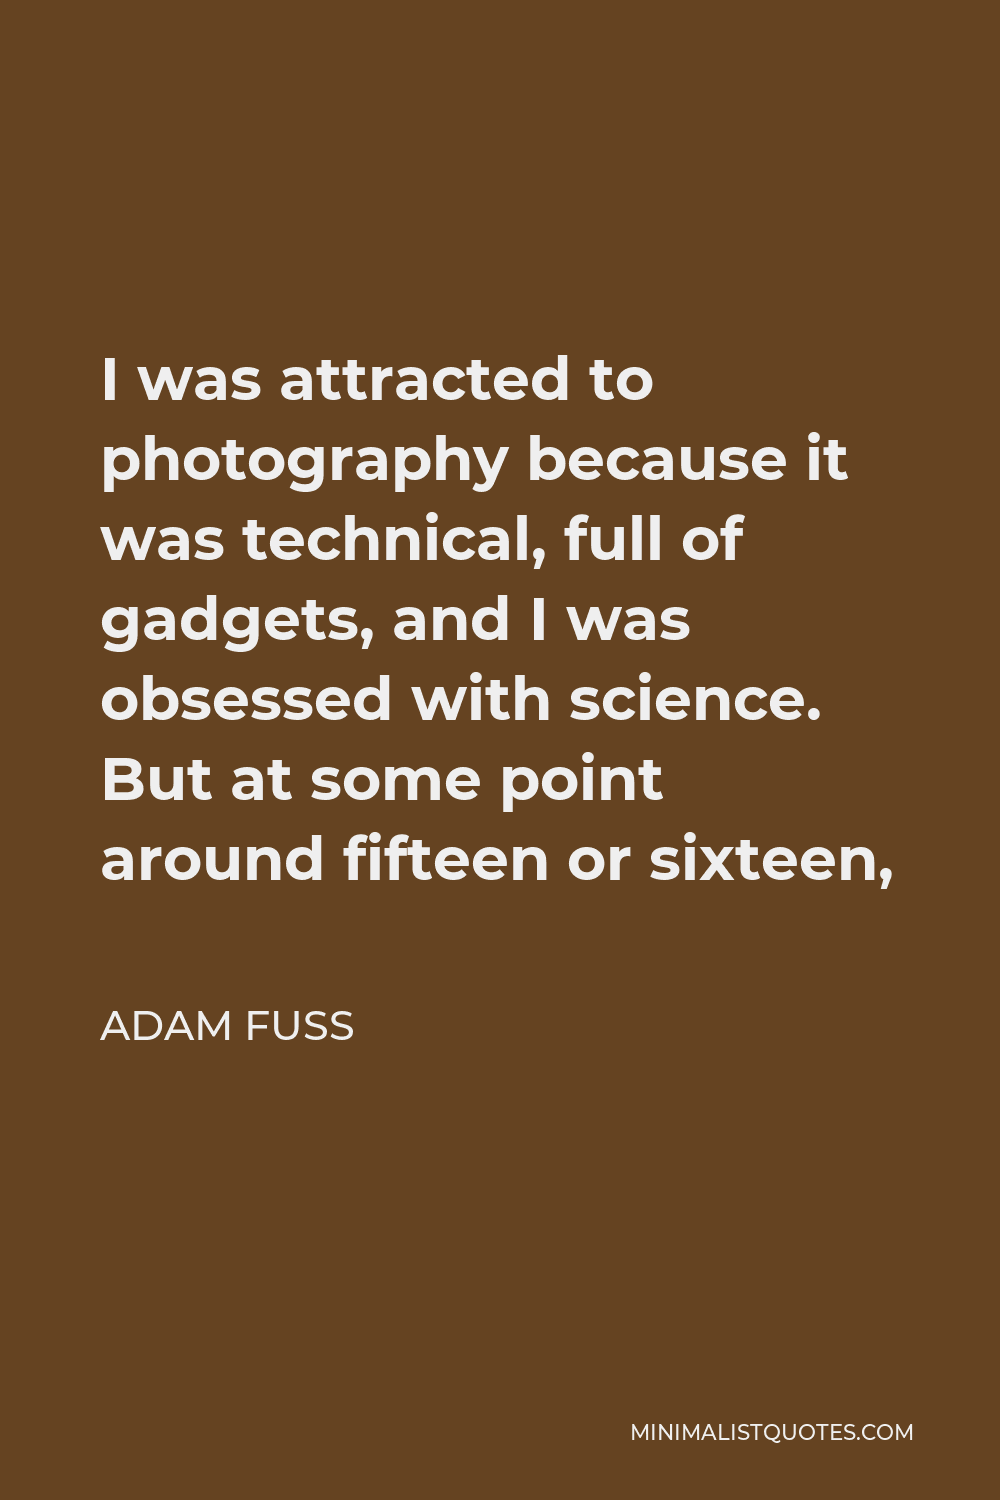 Adam Fuss Quote - I was attracted to photography because it was technical, full of gadgets, and I was obsessed with science. But at some point around fifteen or sixteen,